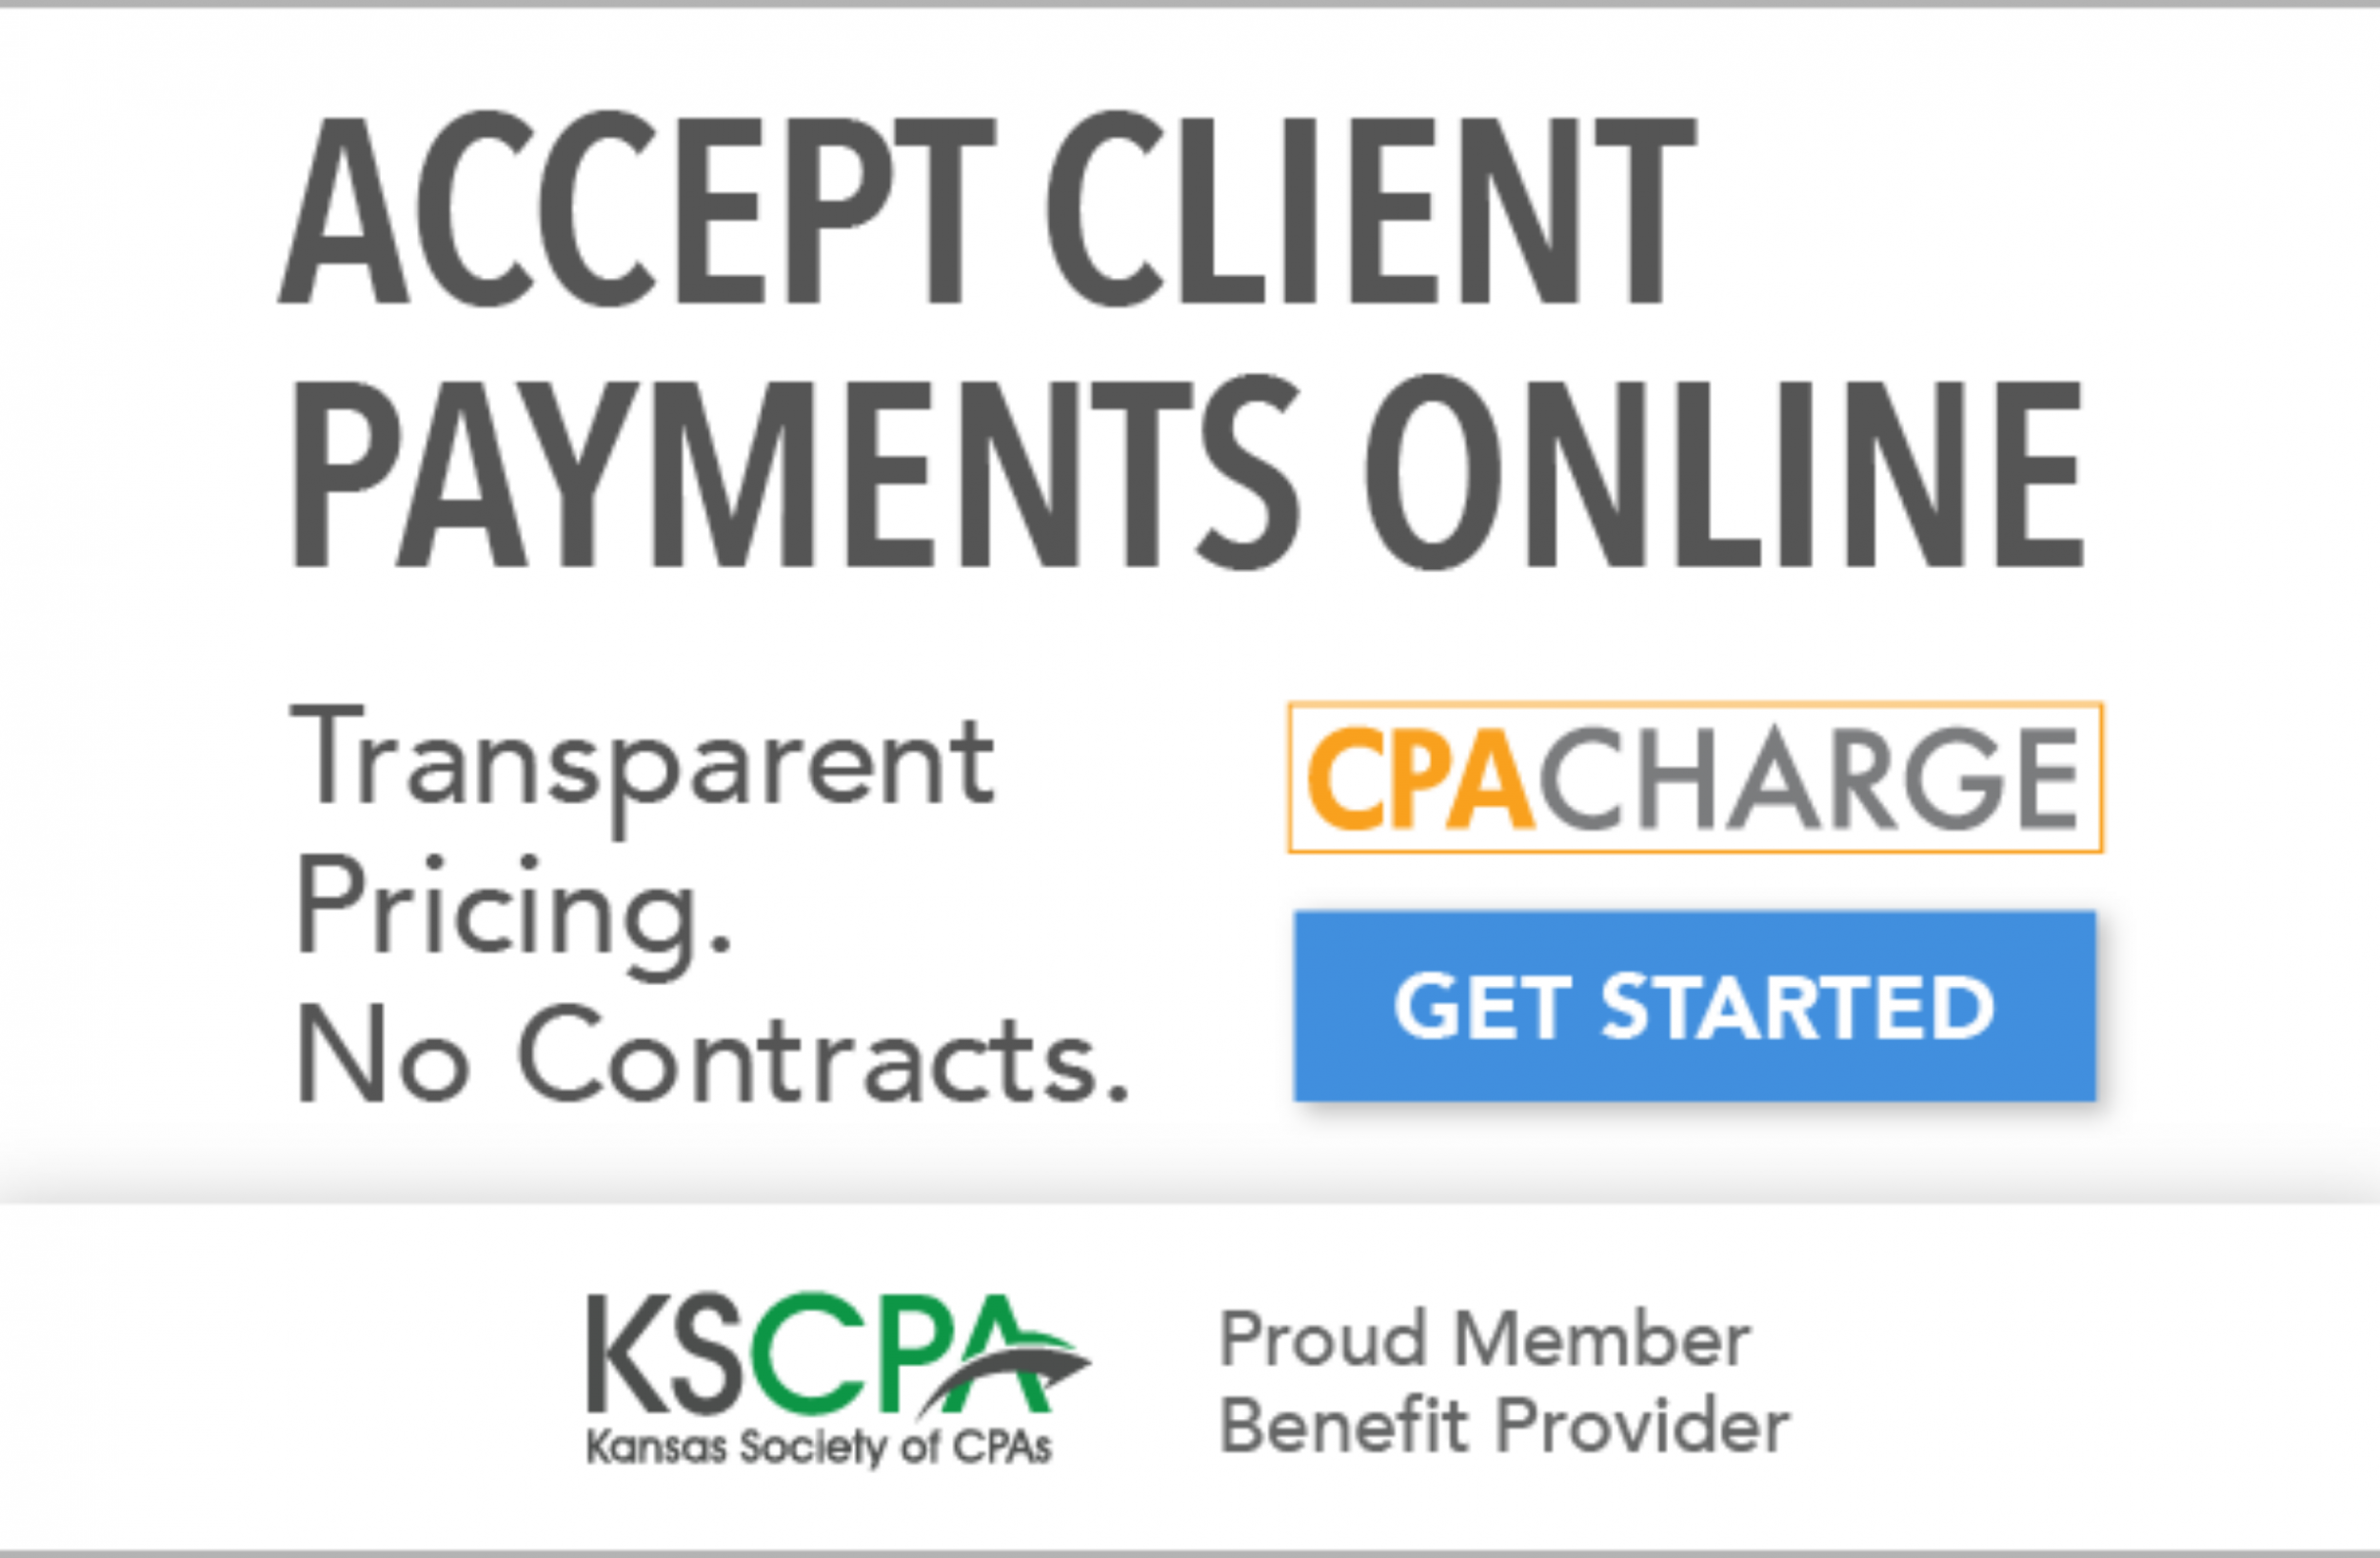 CPA Charge Blog Ad 10.21